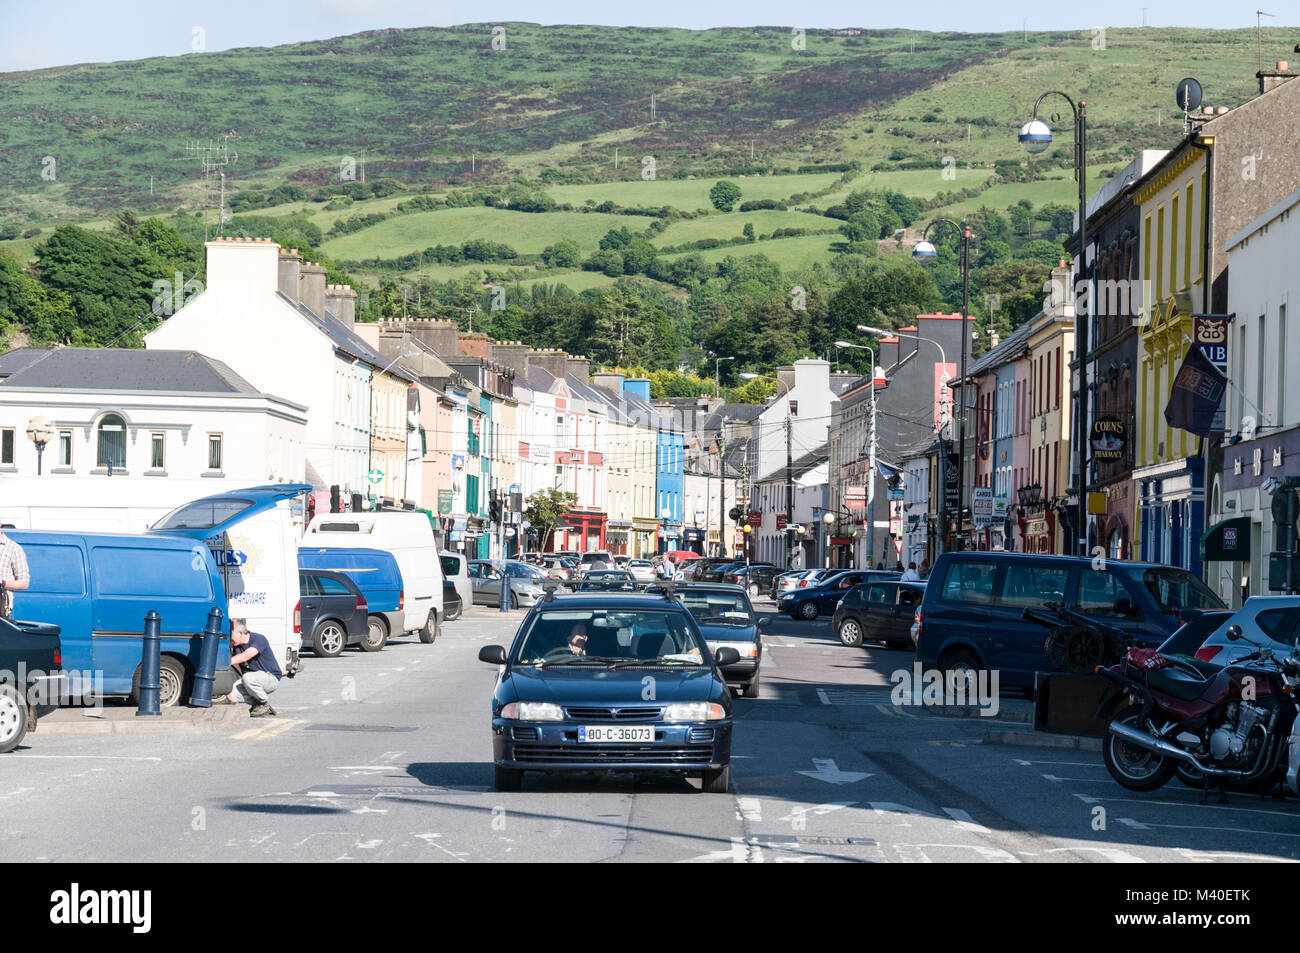 A row of shops in New Street, Bantry, Southern Ireland Stock Photo